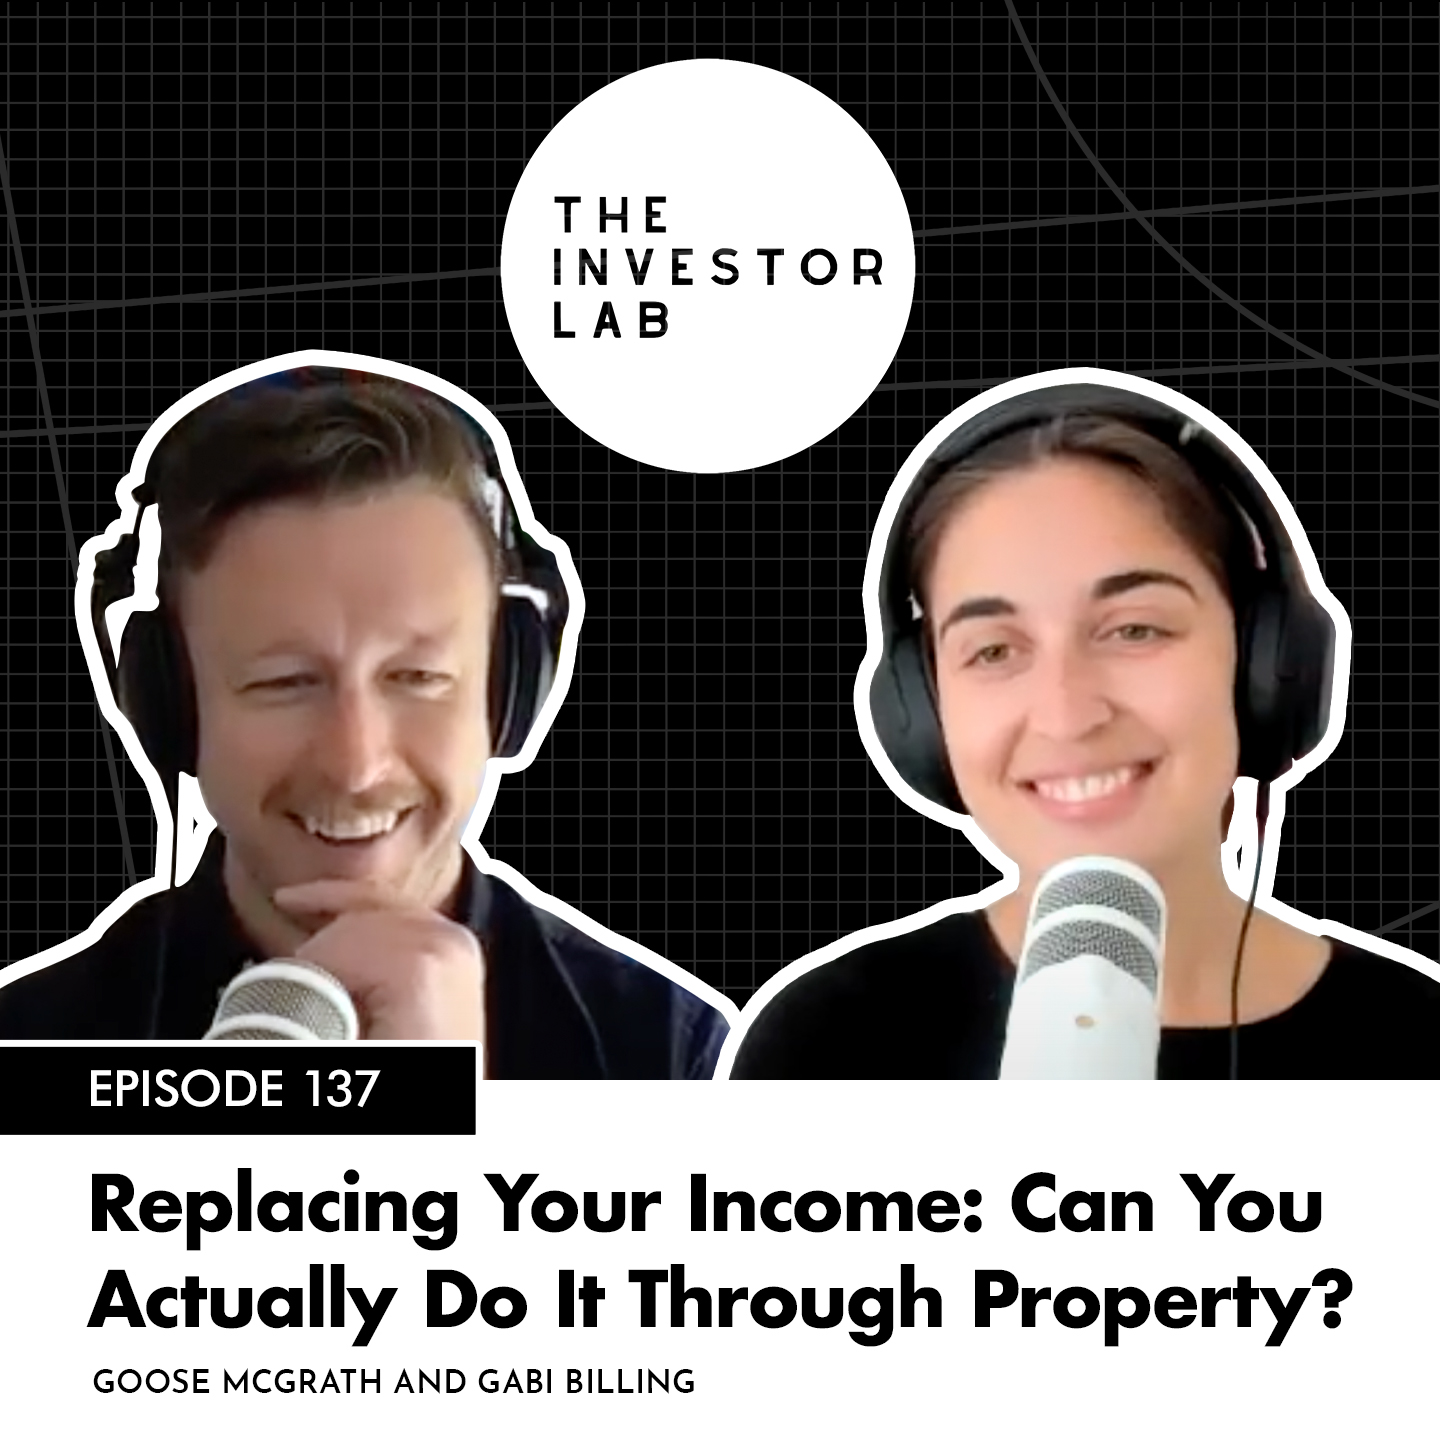 Replacing Your Income: Can You Actually Do It Through Property?